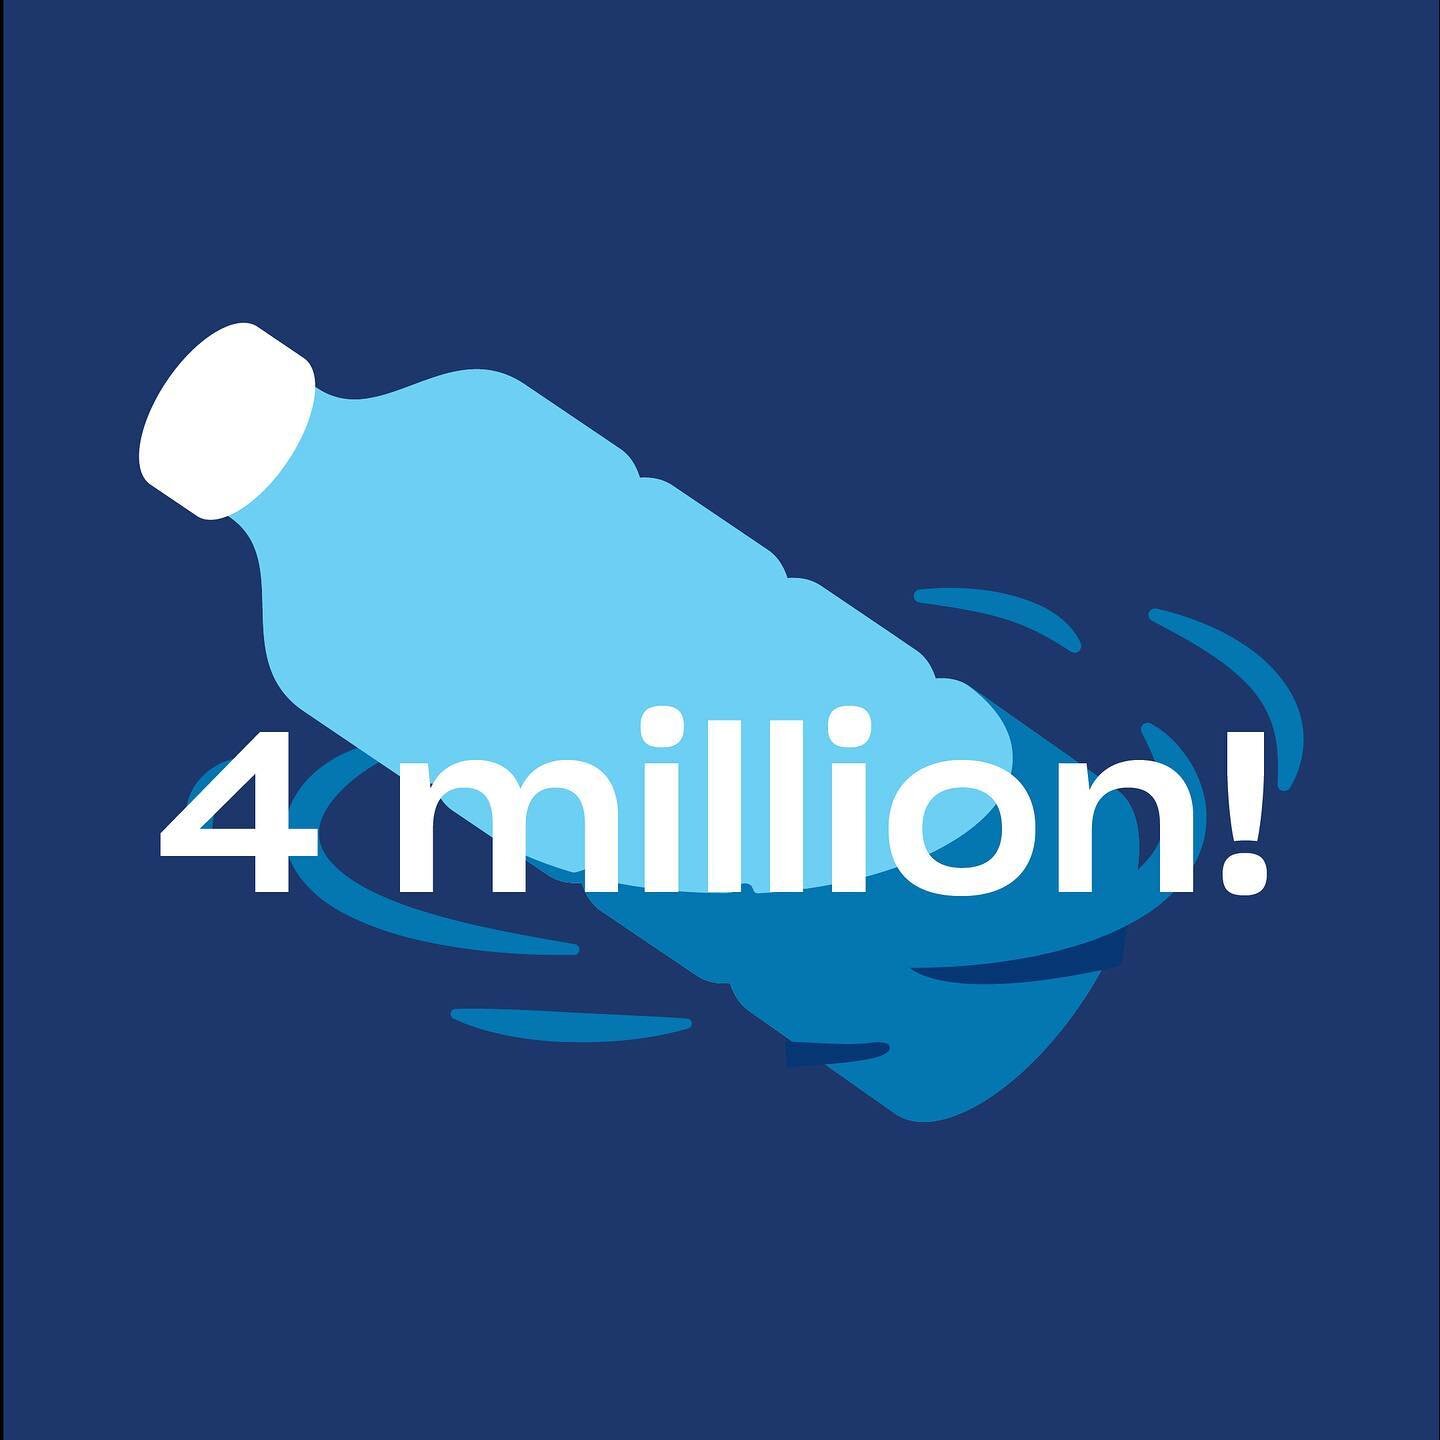 One million plastic bottles are used every minute; it took us 1,796,782 minutes to replace four million. But every year, we reduce the time it takes to replace the next million, so watch out, we're coming for you, plastic bottles!

#stopplastic #plas